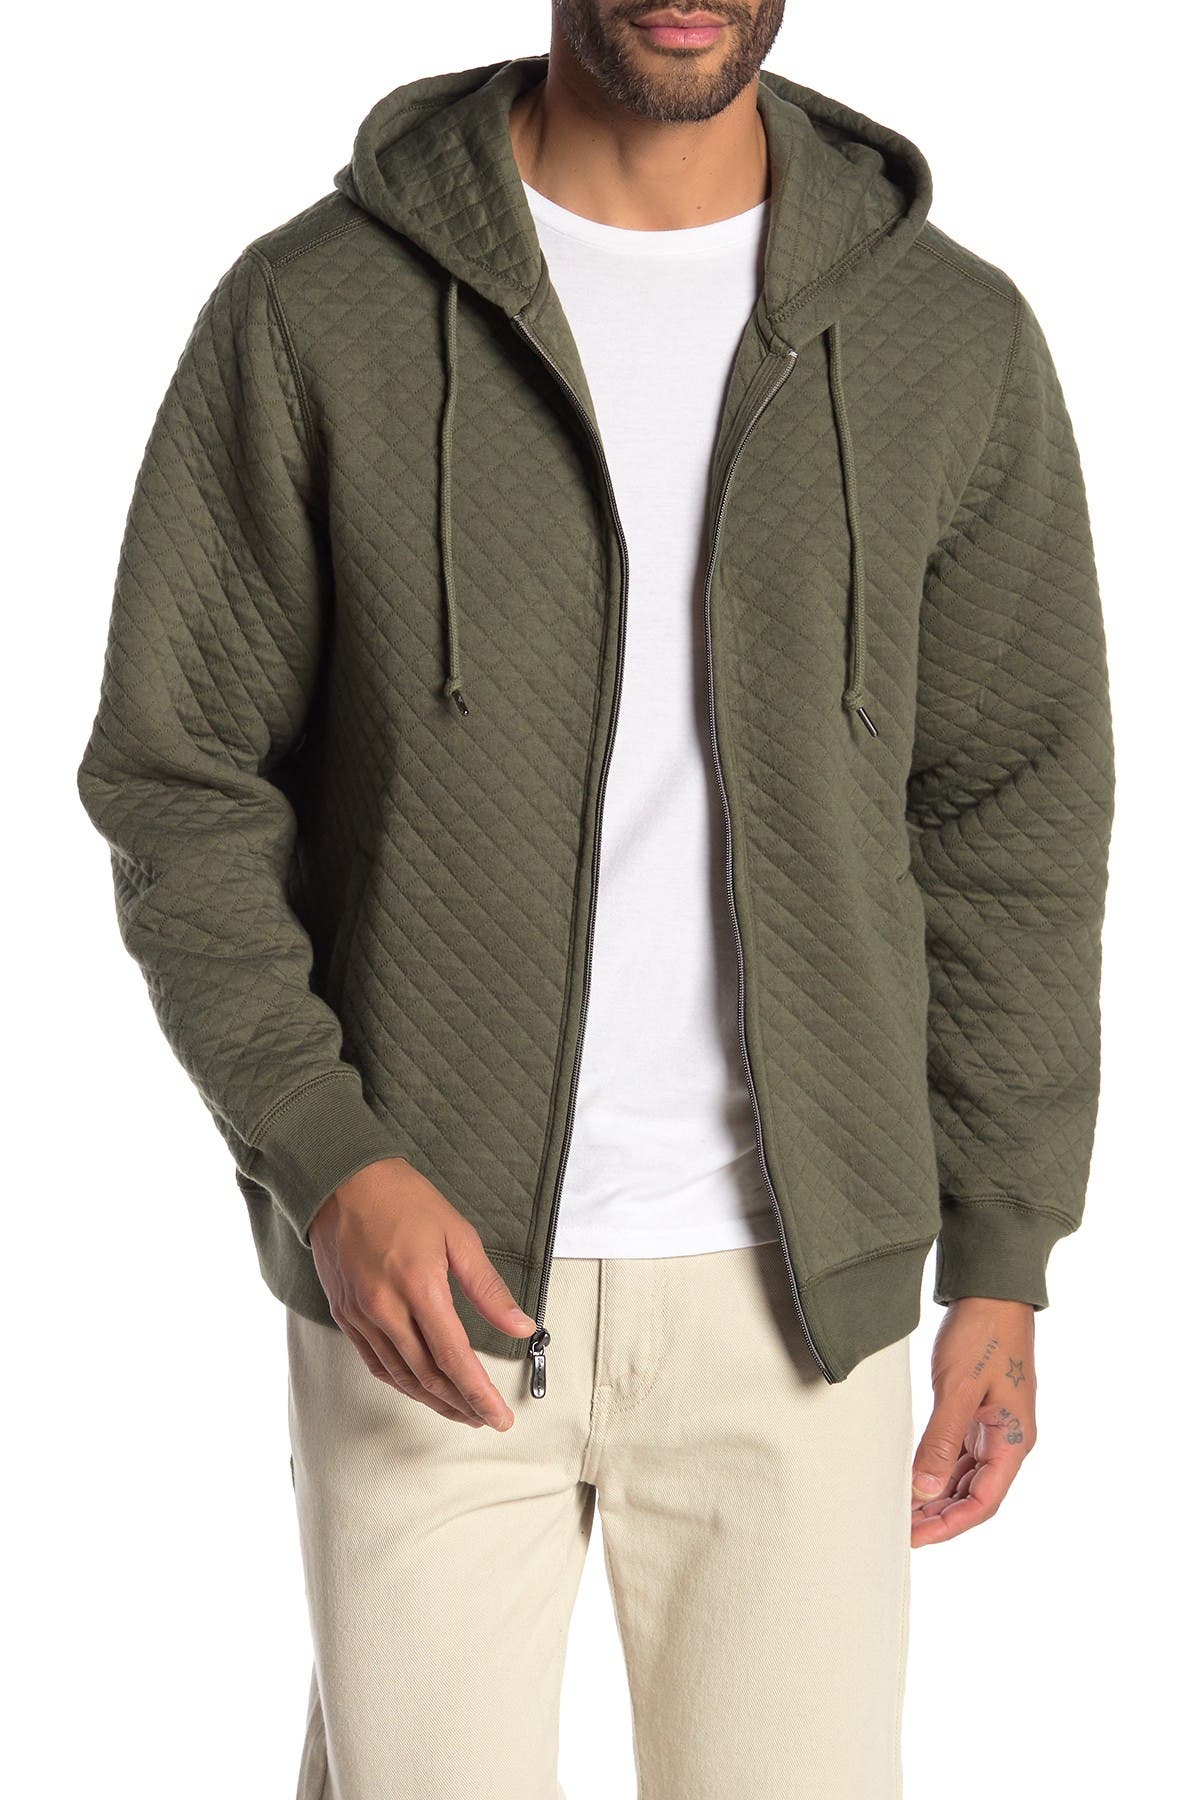 Tommy Bahama | Quilt This City Zip 